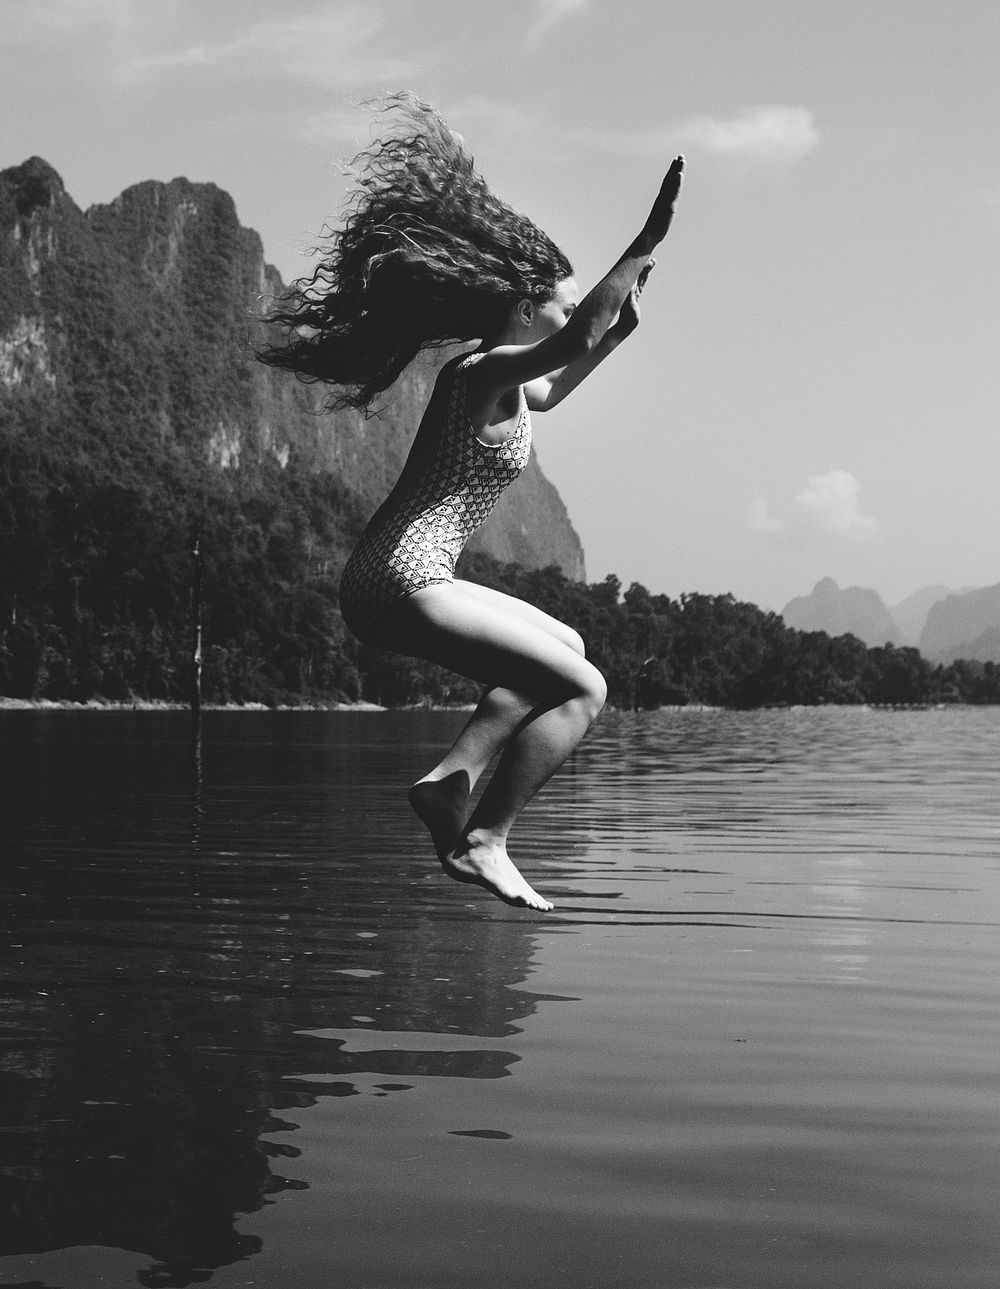 Woman jumping into the water